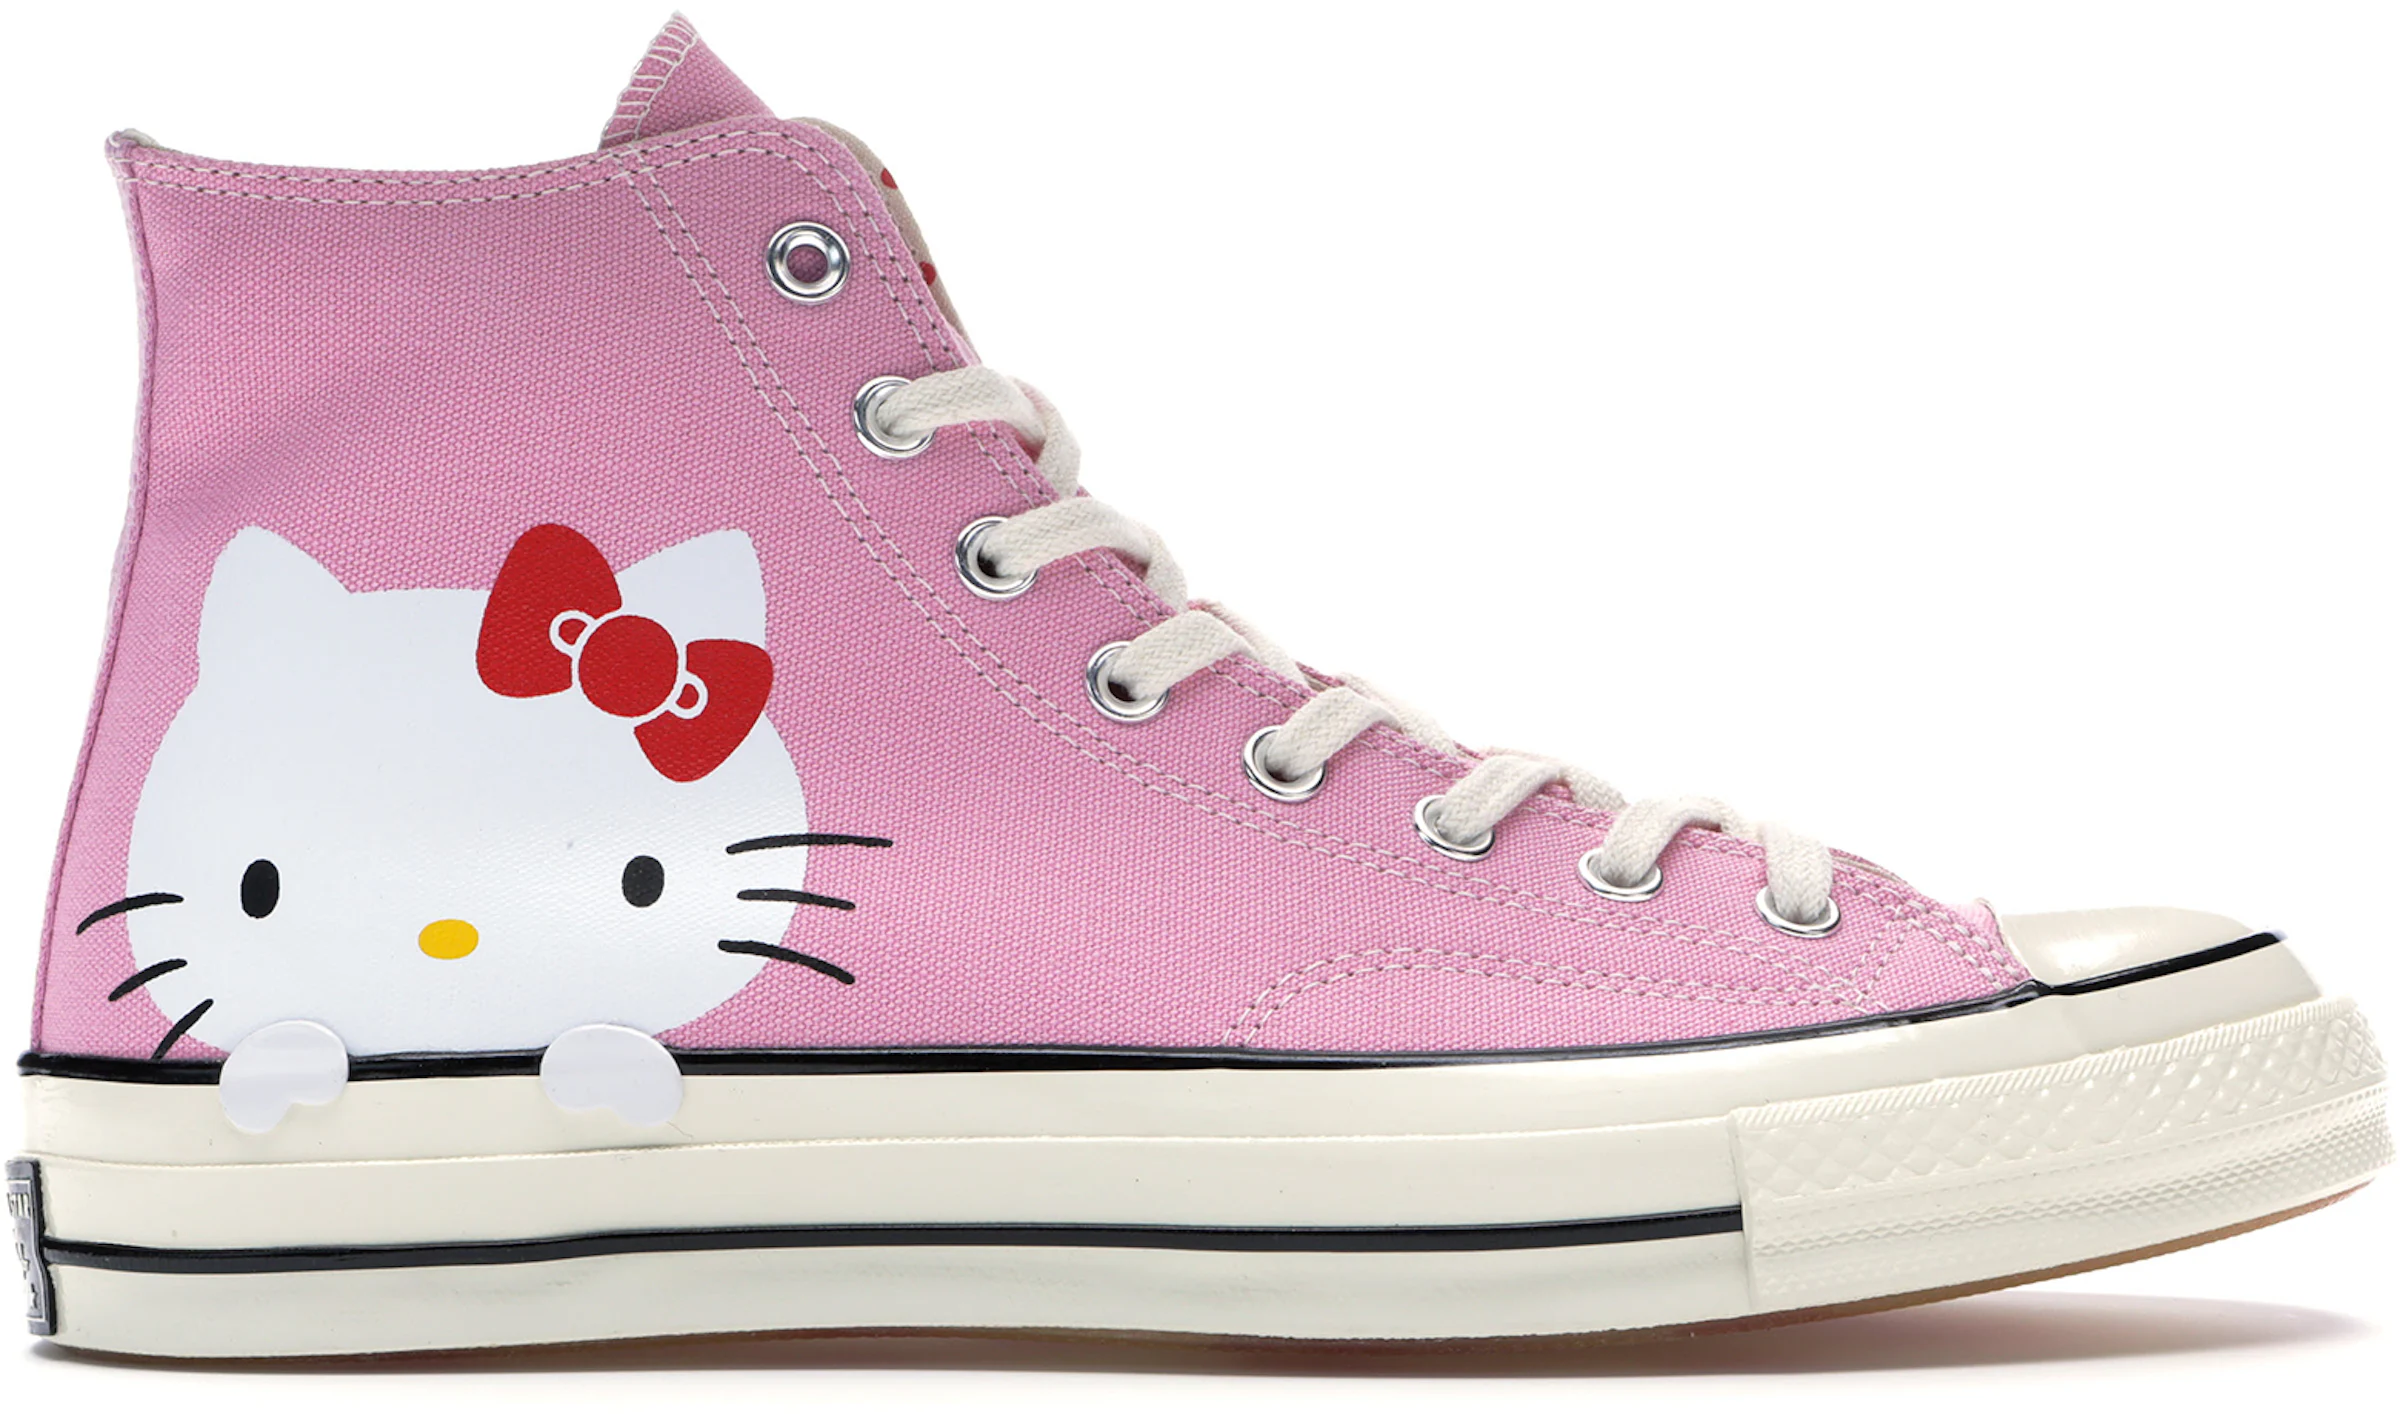 https://images.stockx.com/images/Converse-Chuck-Taylor-All-Star-70s-Hi-Hello-Kitty-Pink-Product.jpg?fit=fill&bg=FFFFFF&w=1200&h=857&fm=webp&auto=compress&dpr=2&trim=color&updated_at=1616755400&q=60